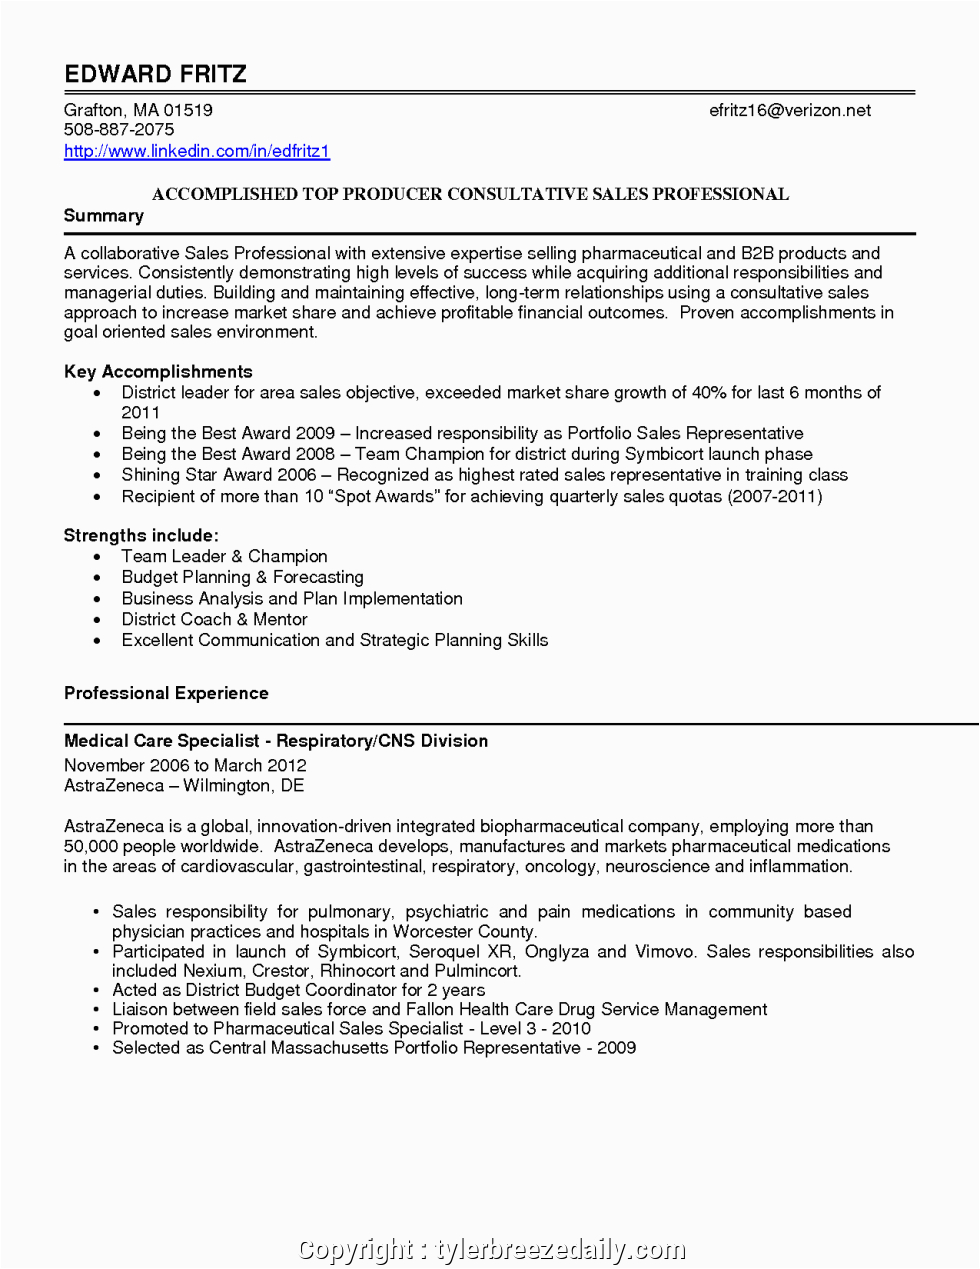 Professional Summary Resume Sample for Manager Simply Professional Summary for Sales Manager Gallery